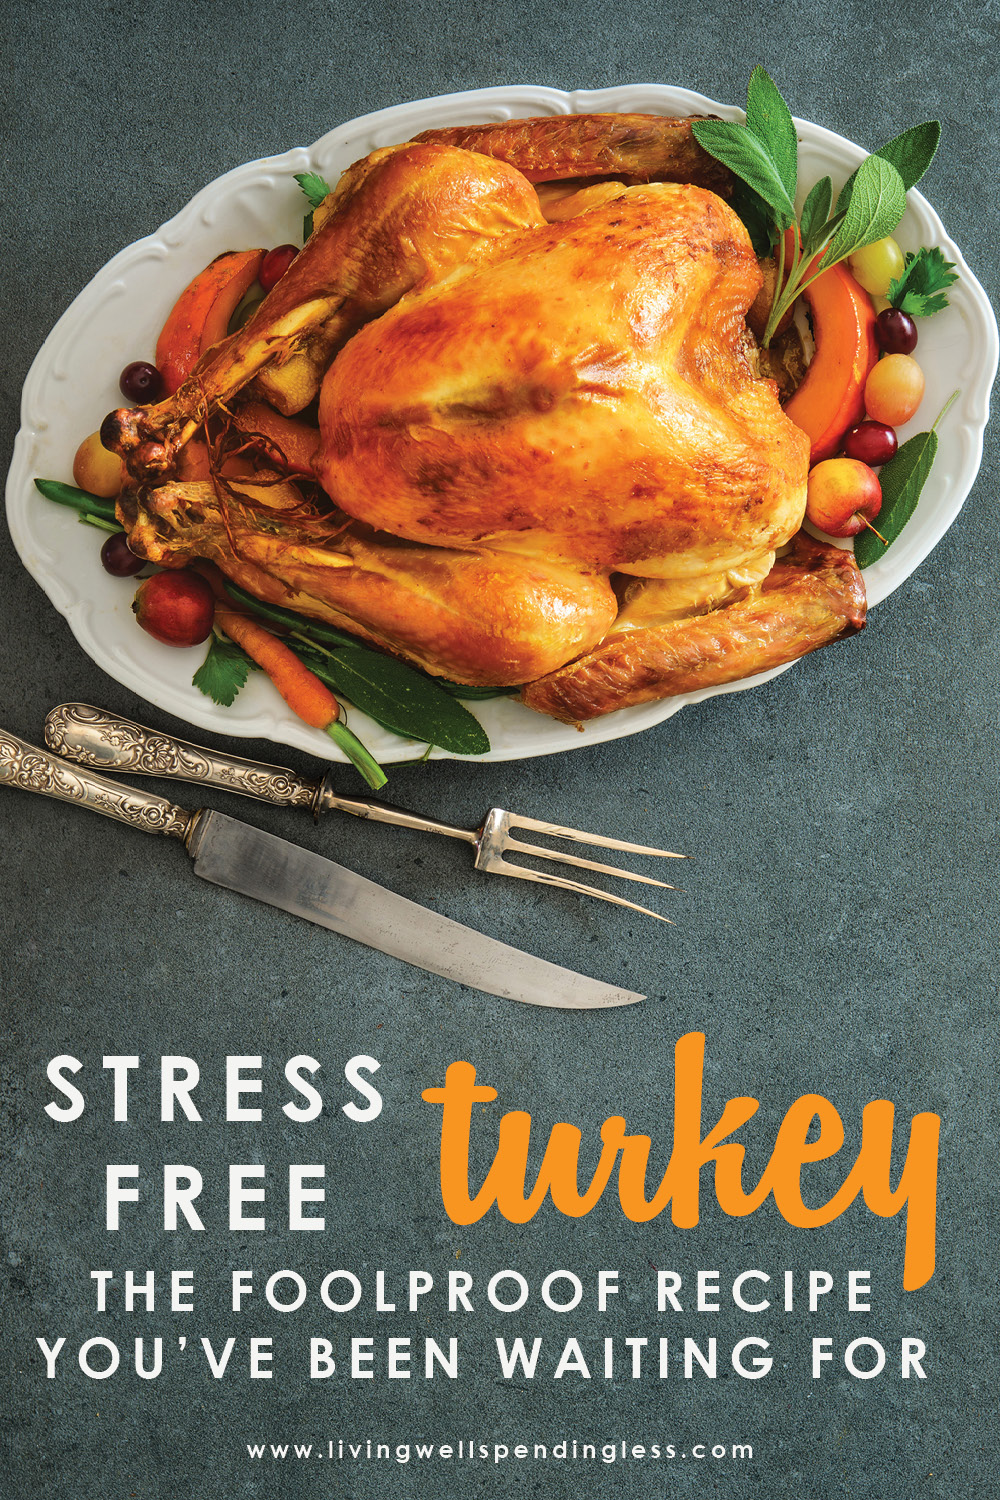 Stress Free Roast Turkey: The Foolproof Recipe You’ve Been Waiting For